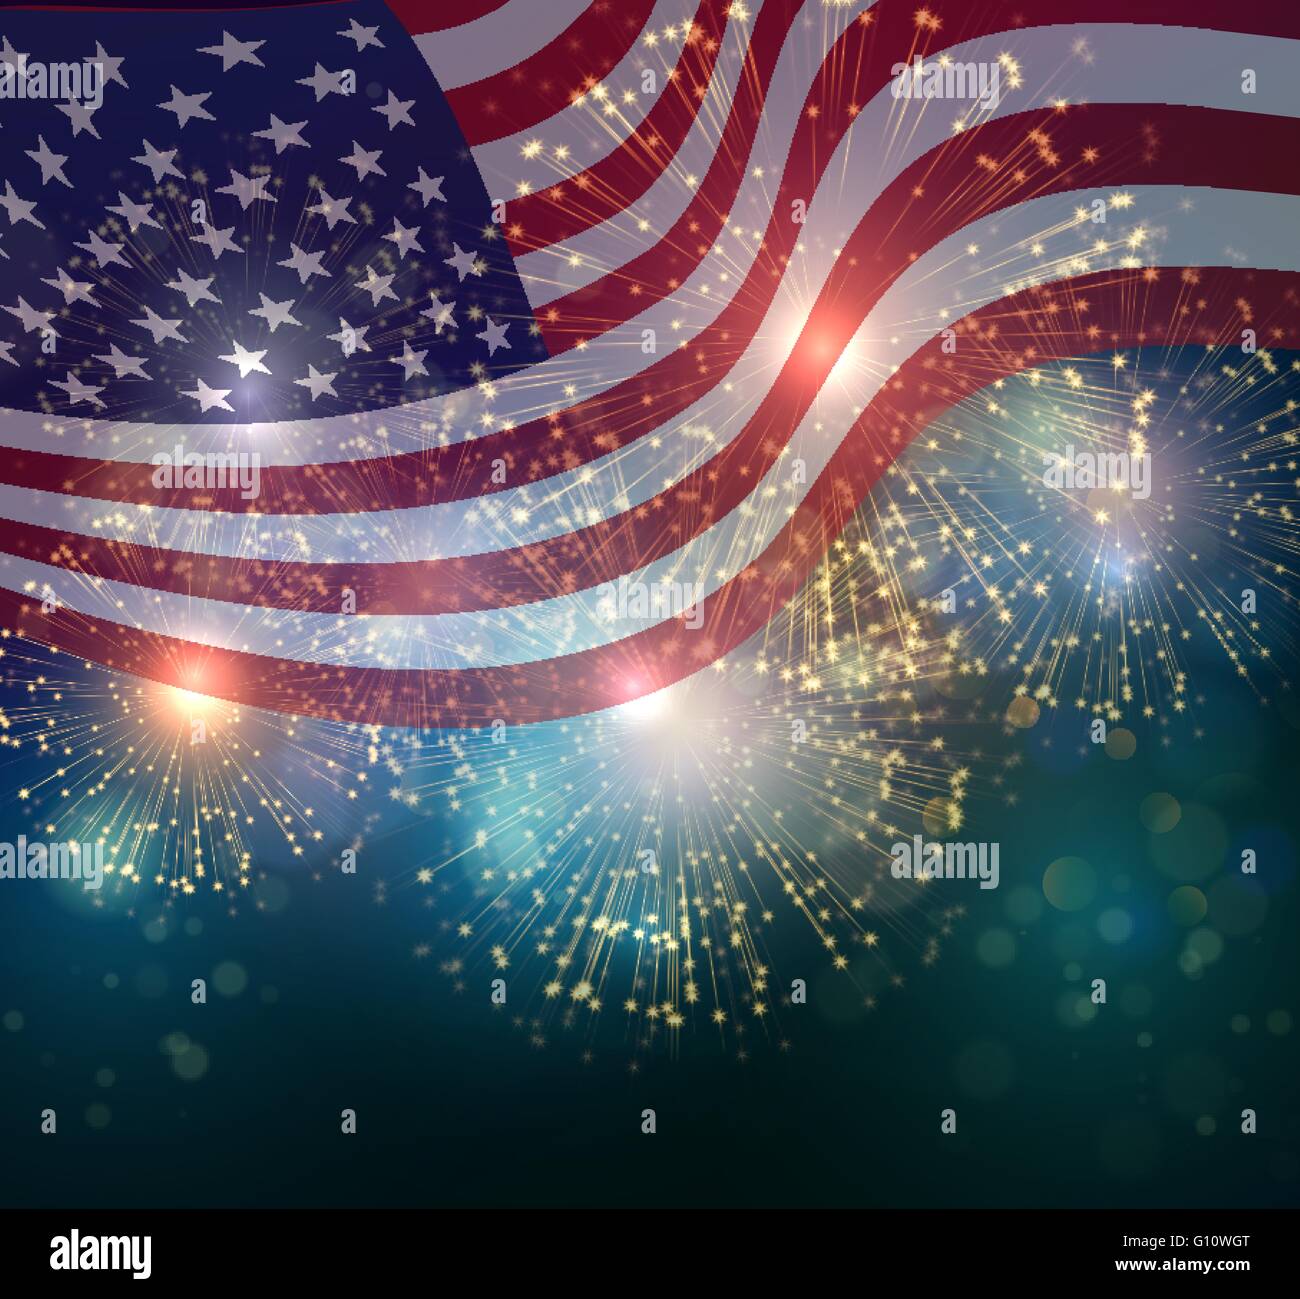 United States flag. Fireworks background for USA Independence Day. Fourth of July celebrate Stock Vector